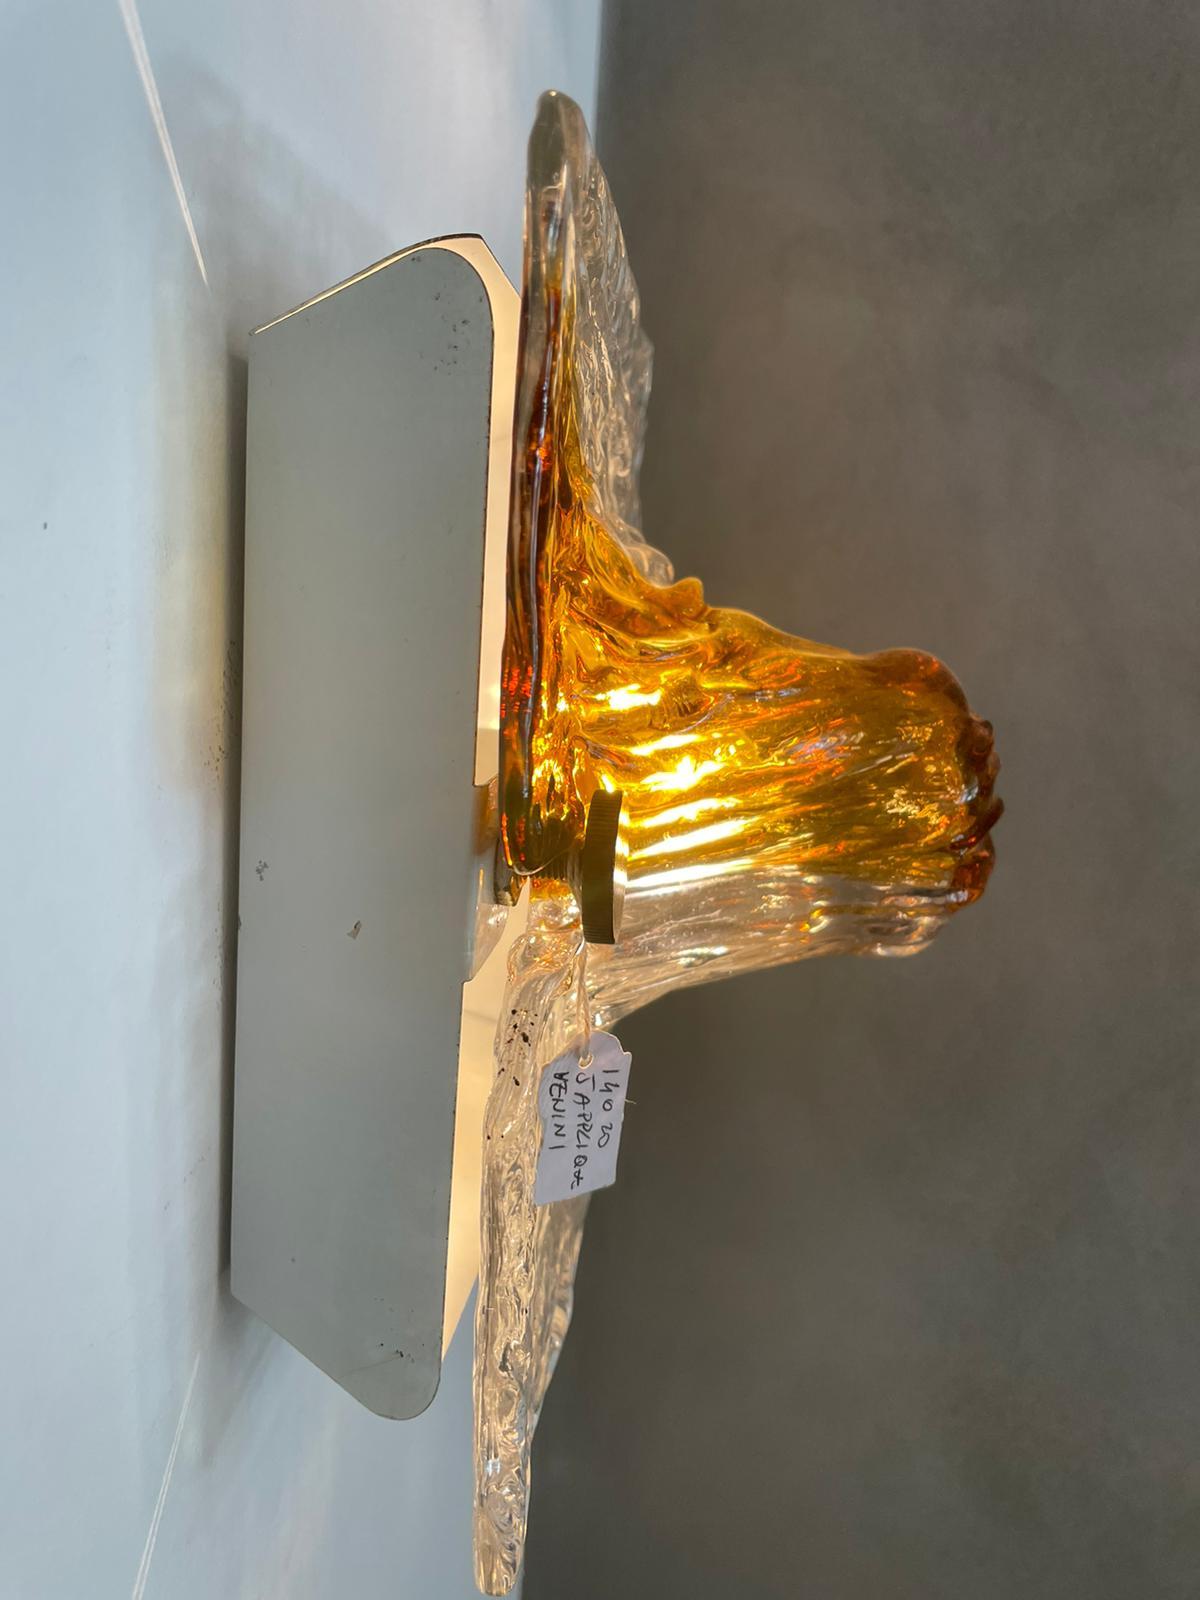 Pair of wall lights desiged by Toni Zuccheri and manufactured by Venini Italy, 1960s
Hand-blown Murano glass with amber tones, white lacquered frames, brass screws.
Excellent vintage patina.
The electrical system has been overhauled.

 